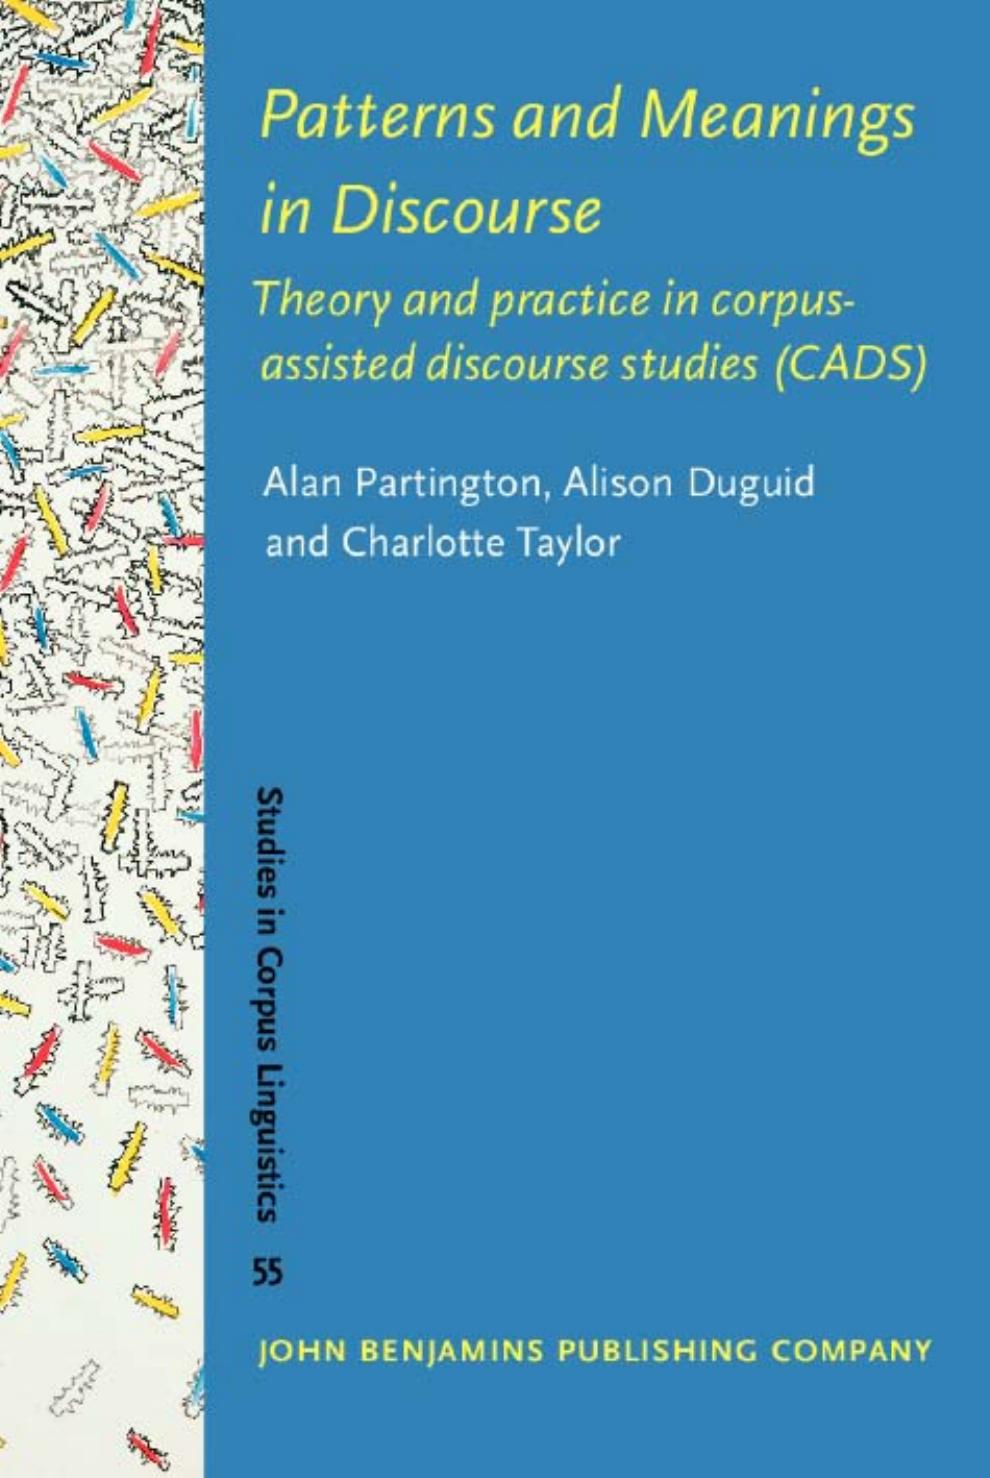 Patterns and Meanings in Discourse: Theory and Practice in Corpus-Assisted Discourse Studies (CADS)